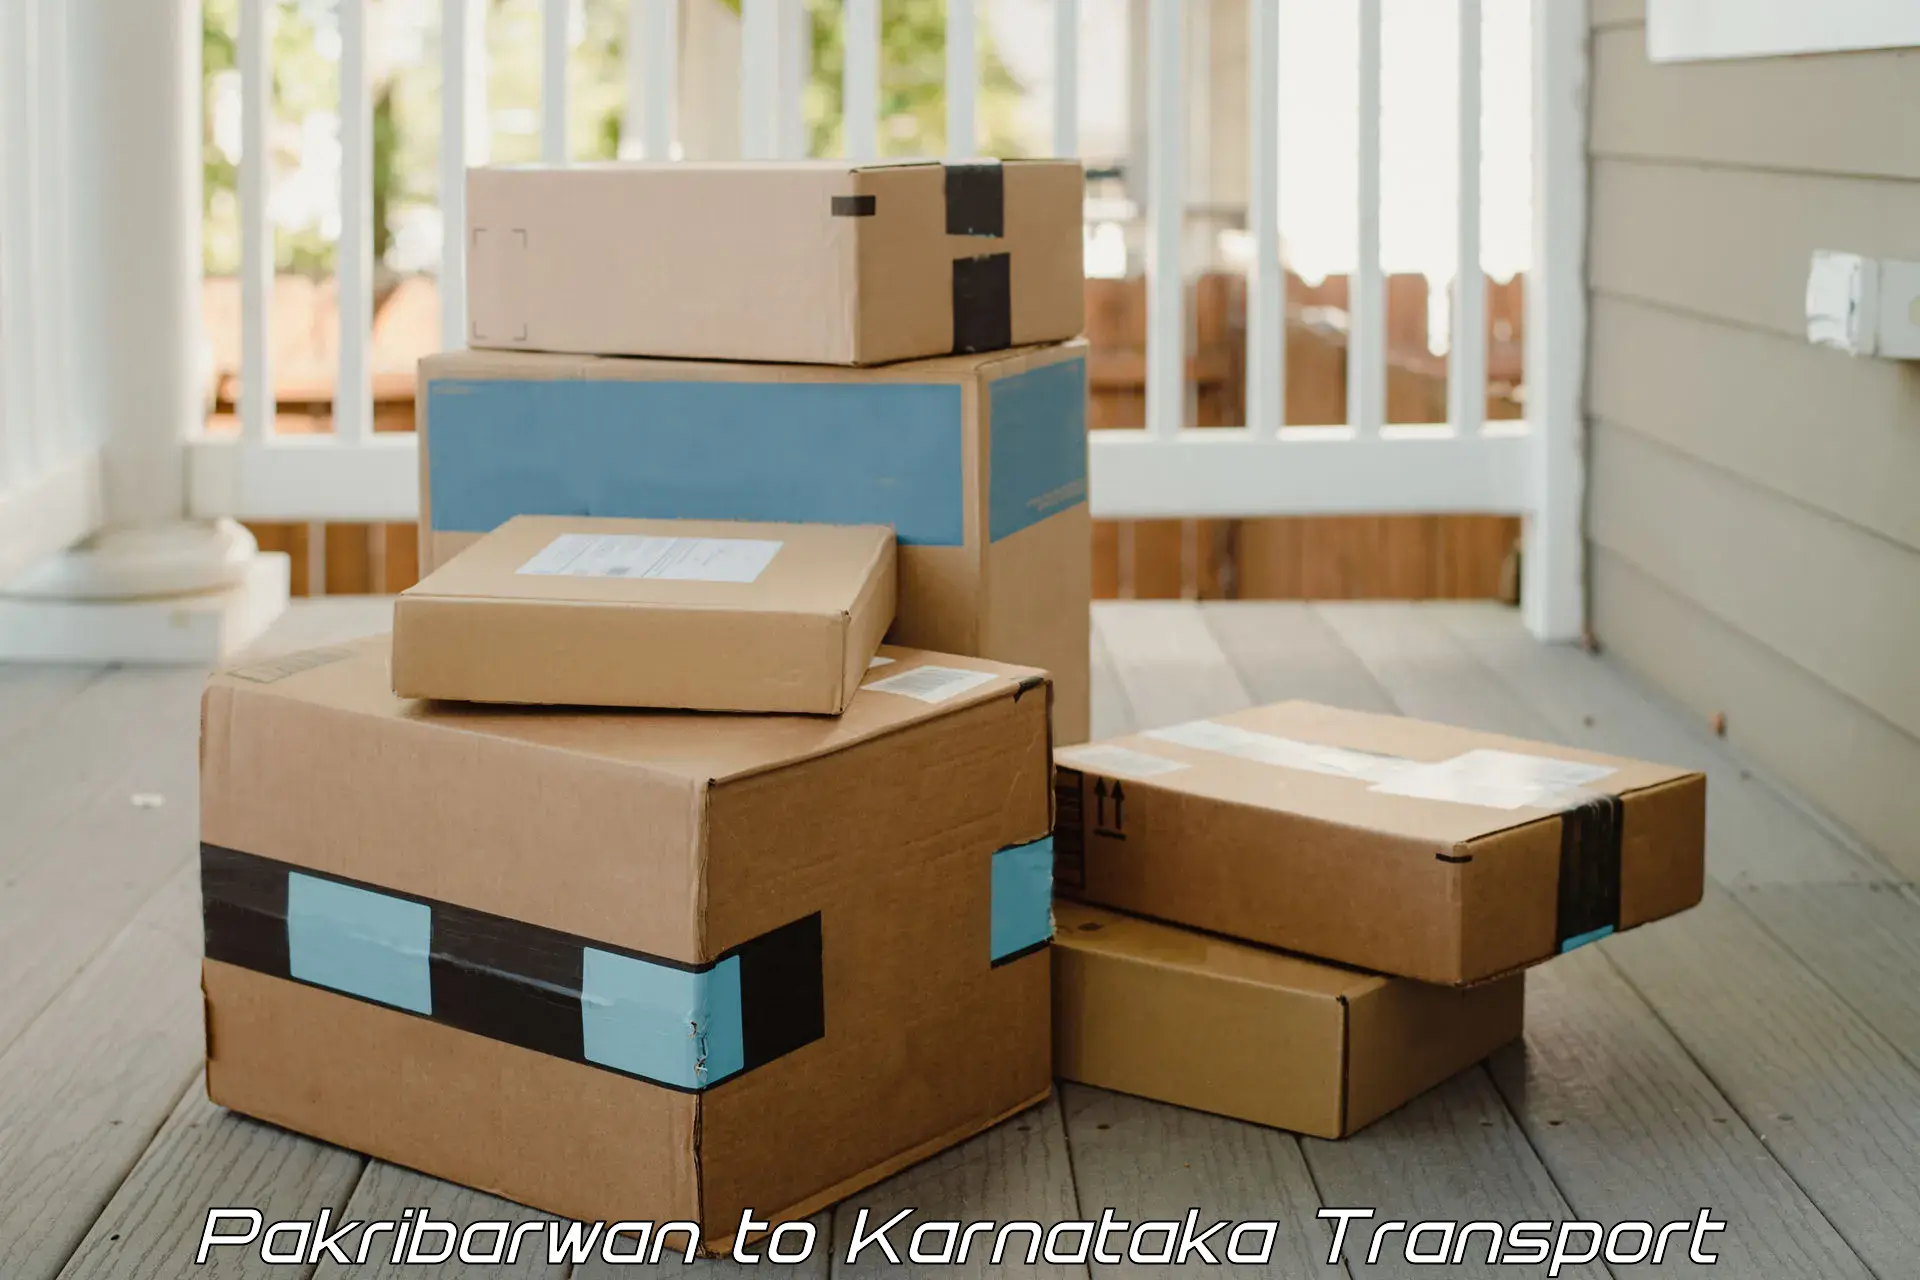 Domestic goods transportation services in Pakribarwan to Manipal